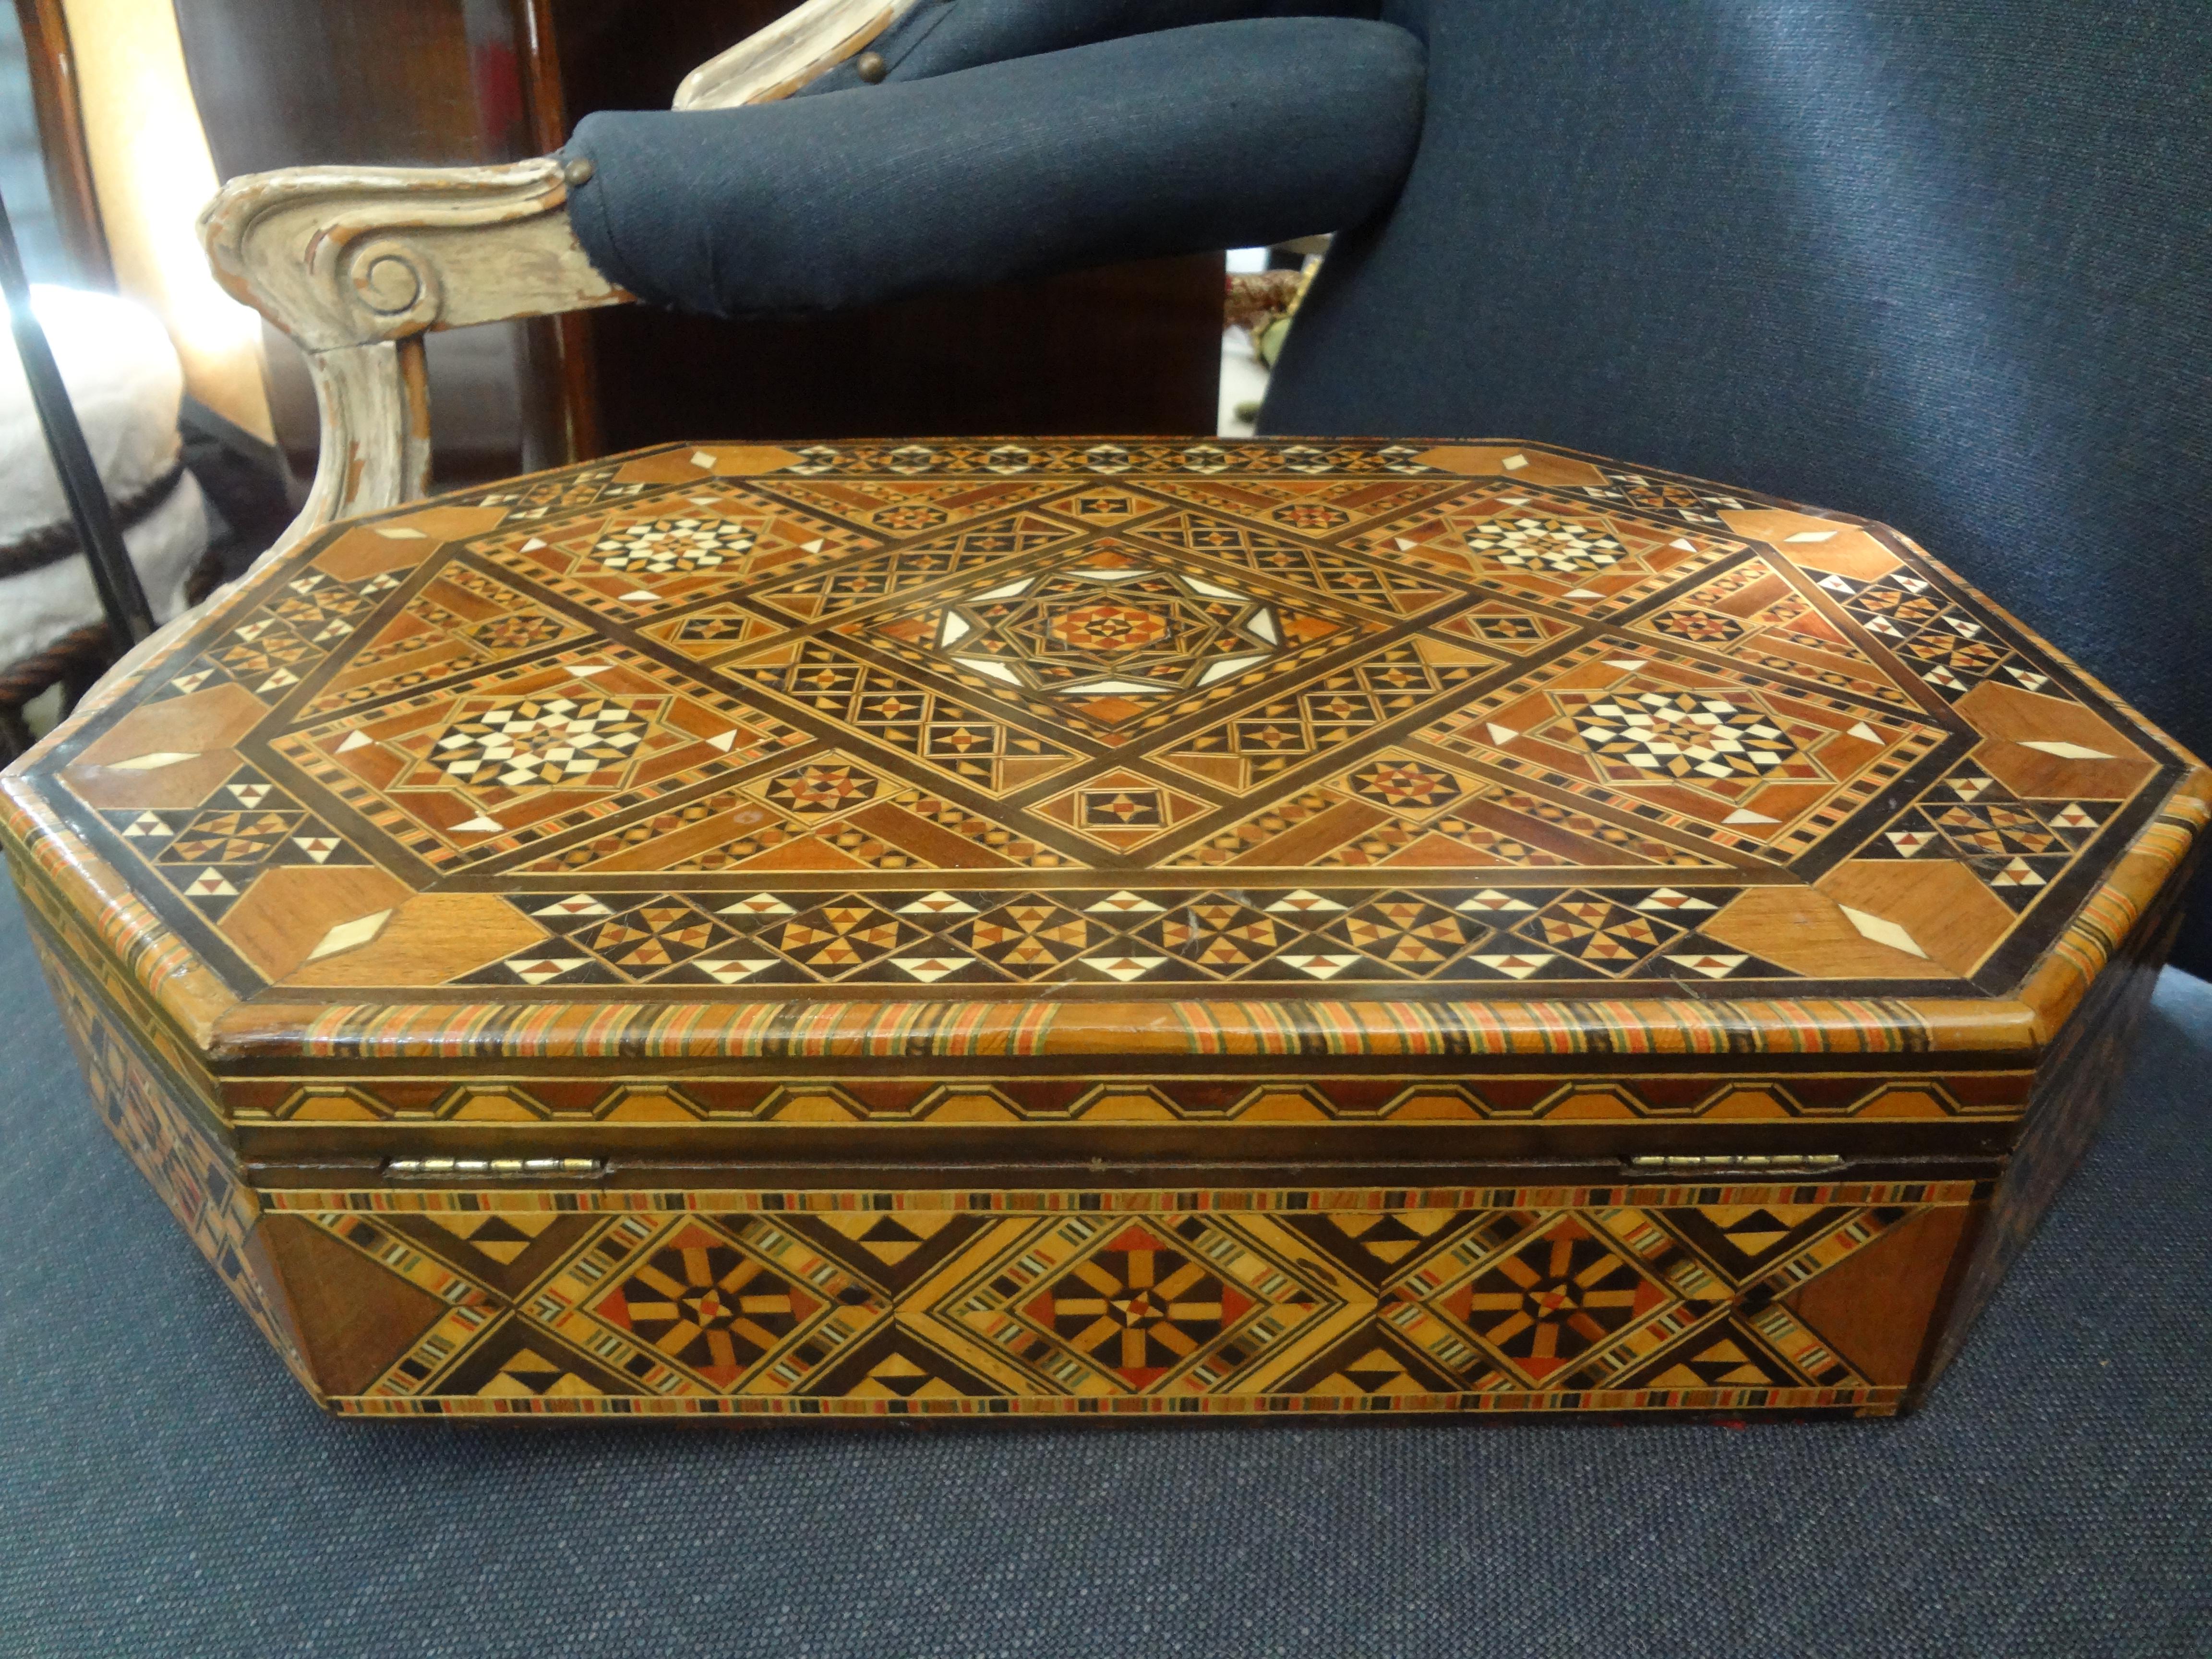 20th Century Large Moroccan or Middle Eastern Octagonal Box with Inlaid Mother of Pearl